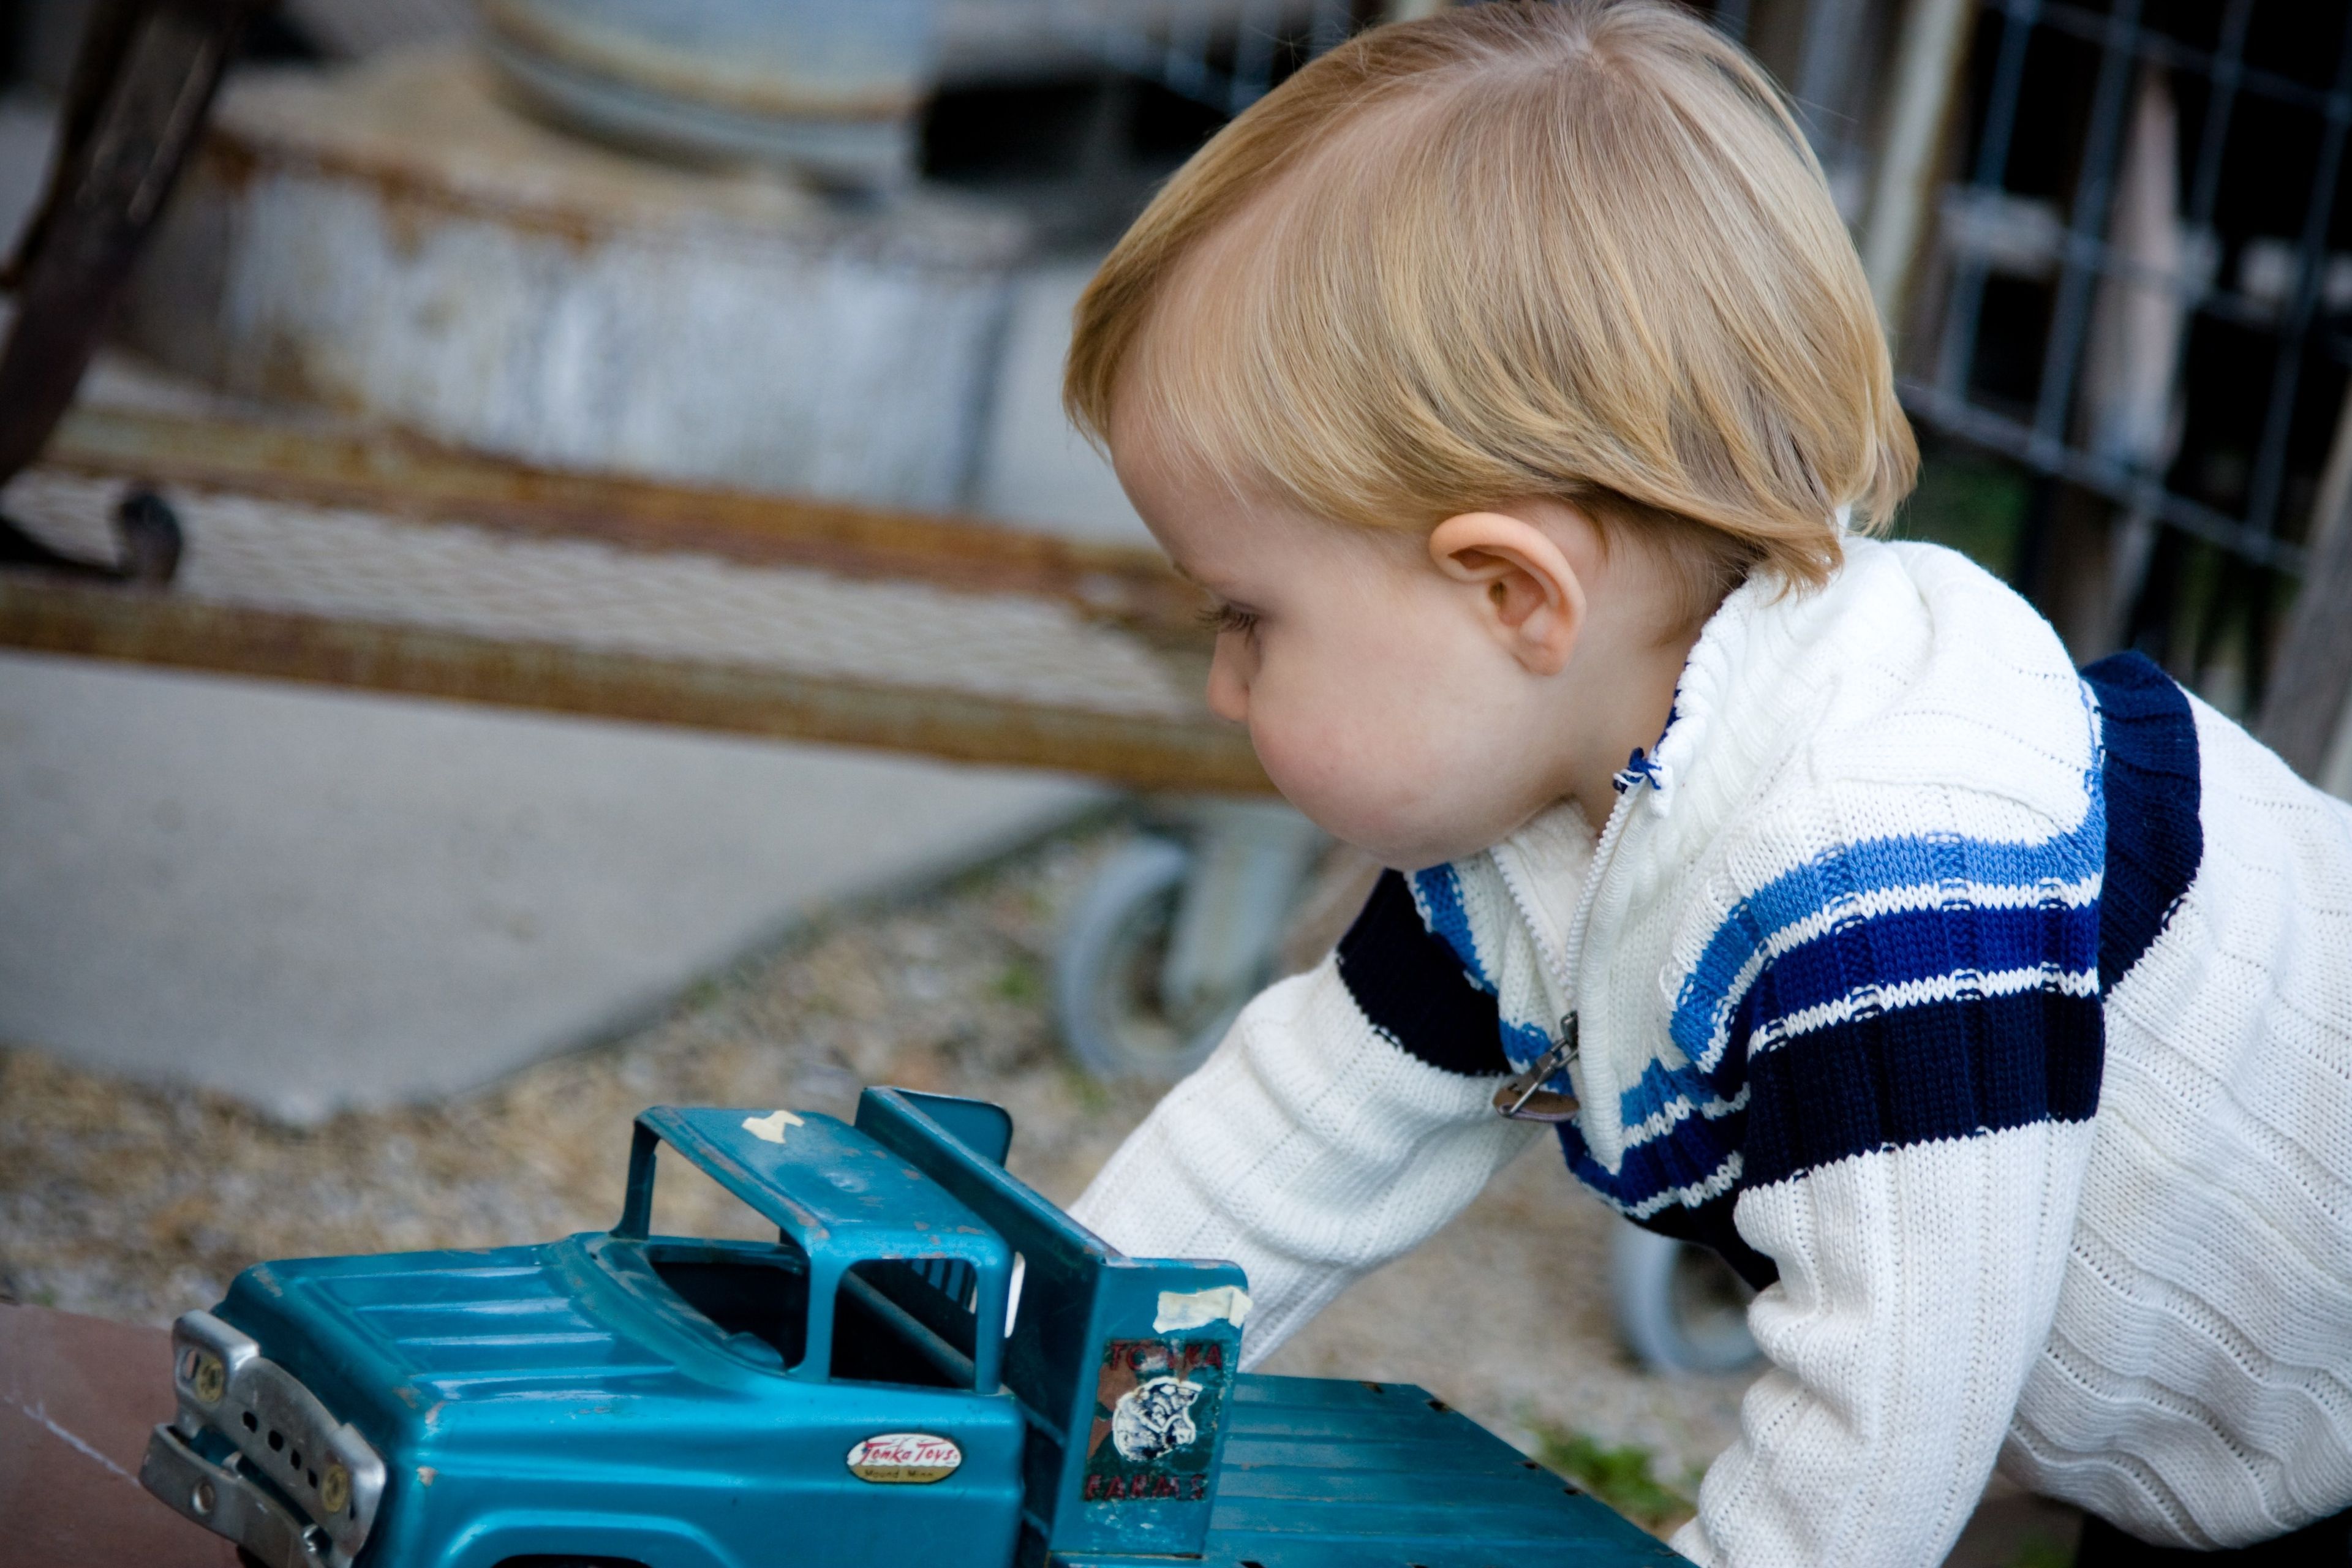 A toddler plays with a blue truck.